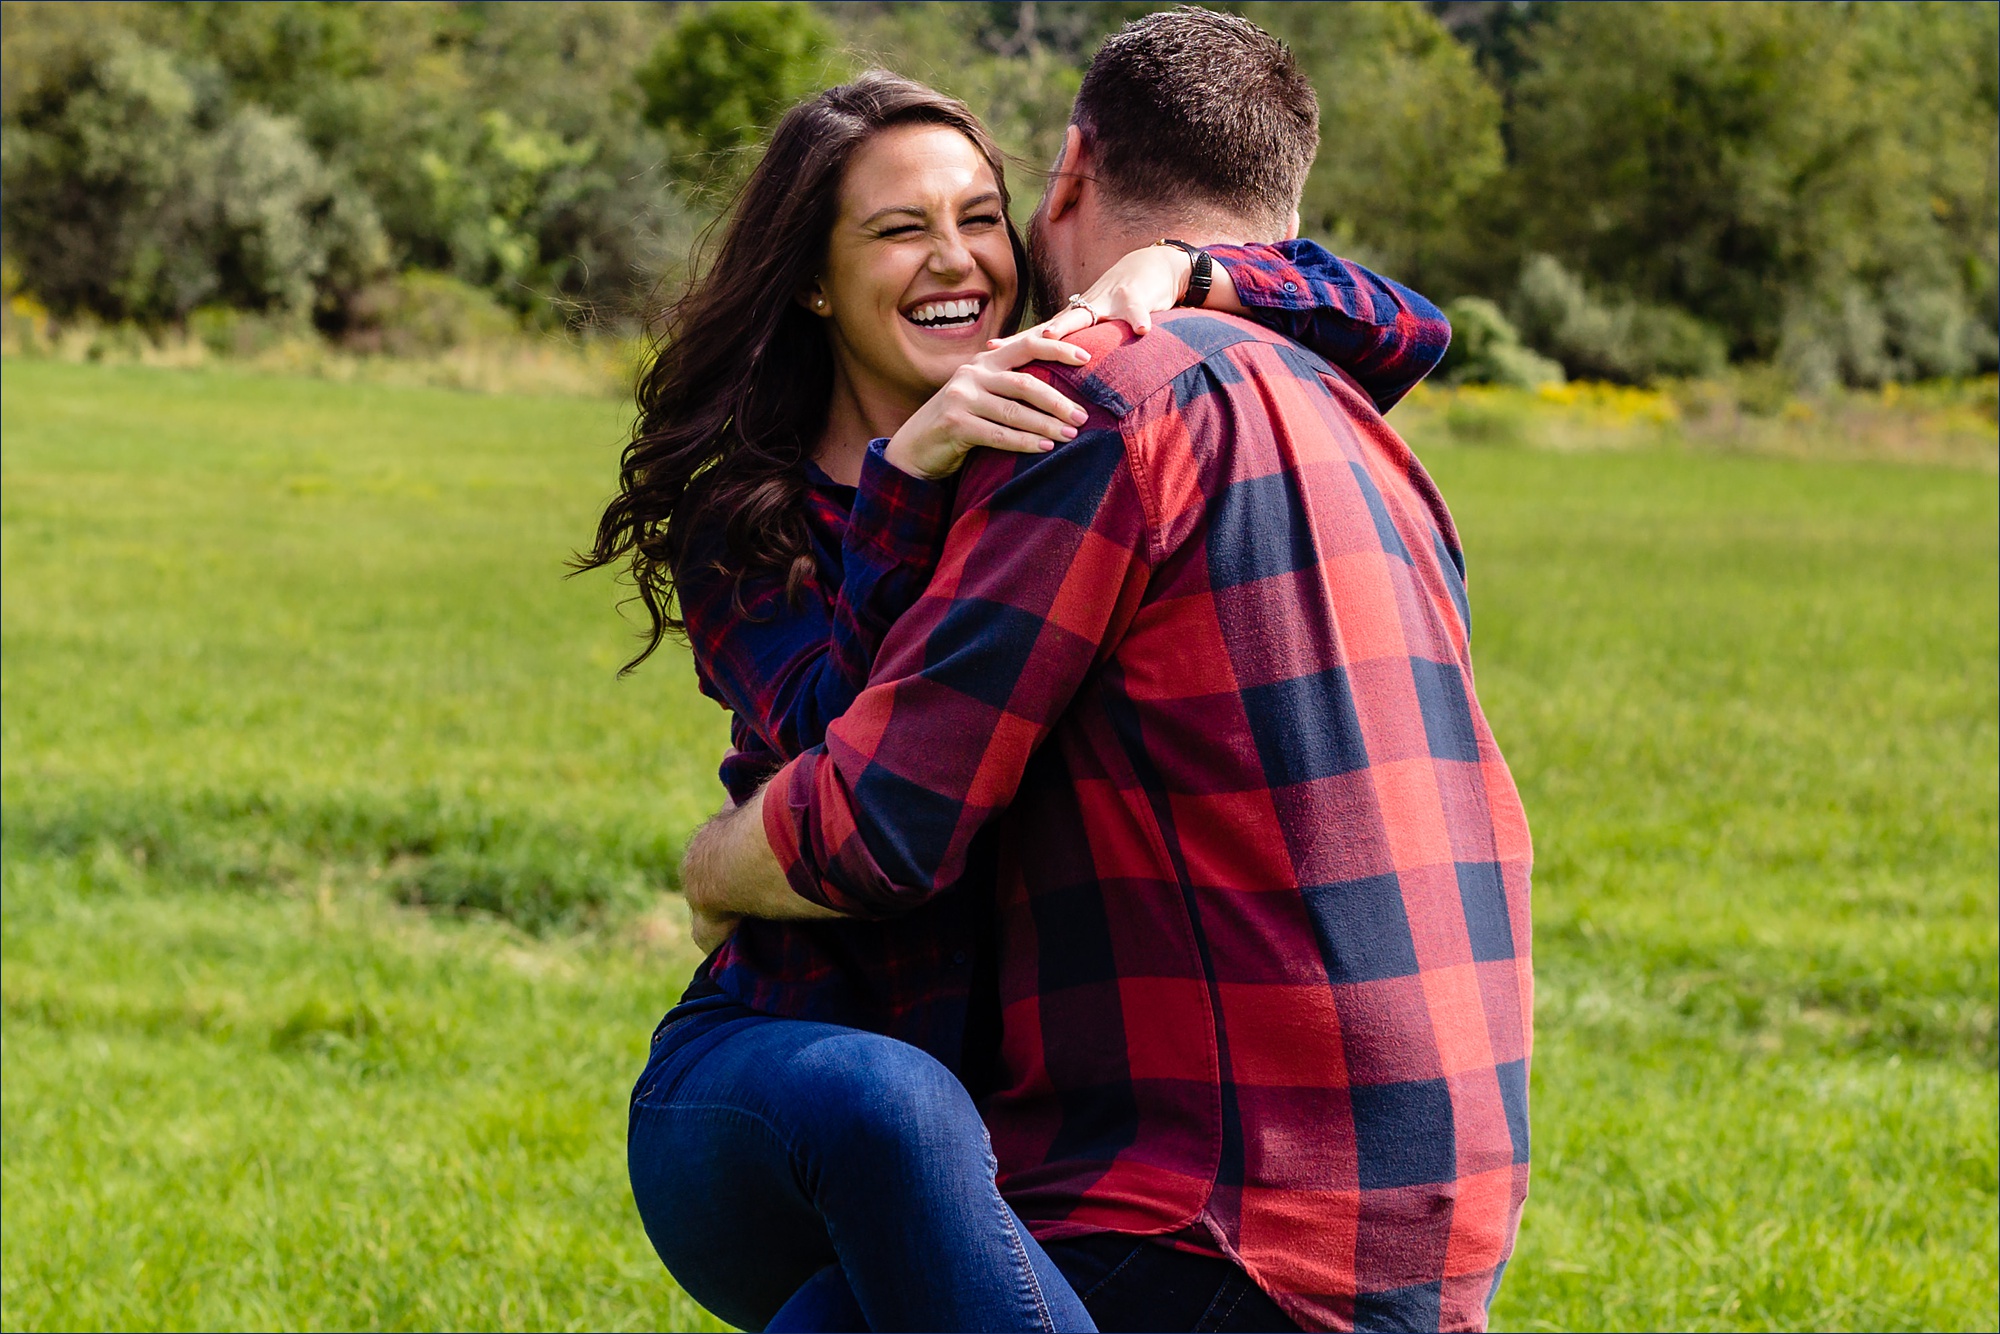 She laughs as he picks her up at their NH engagement session